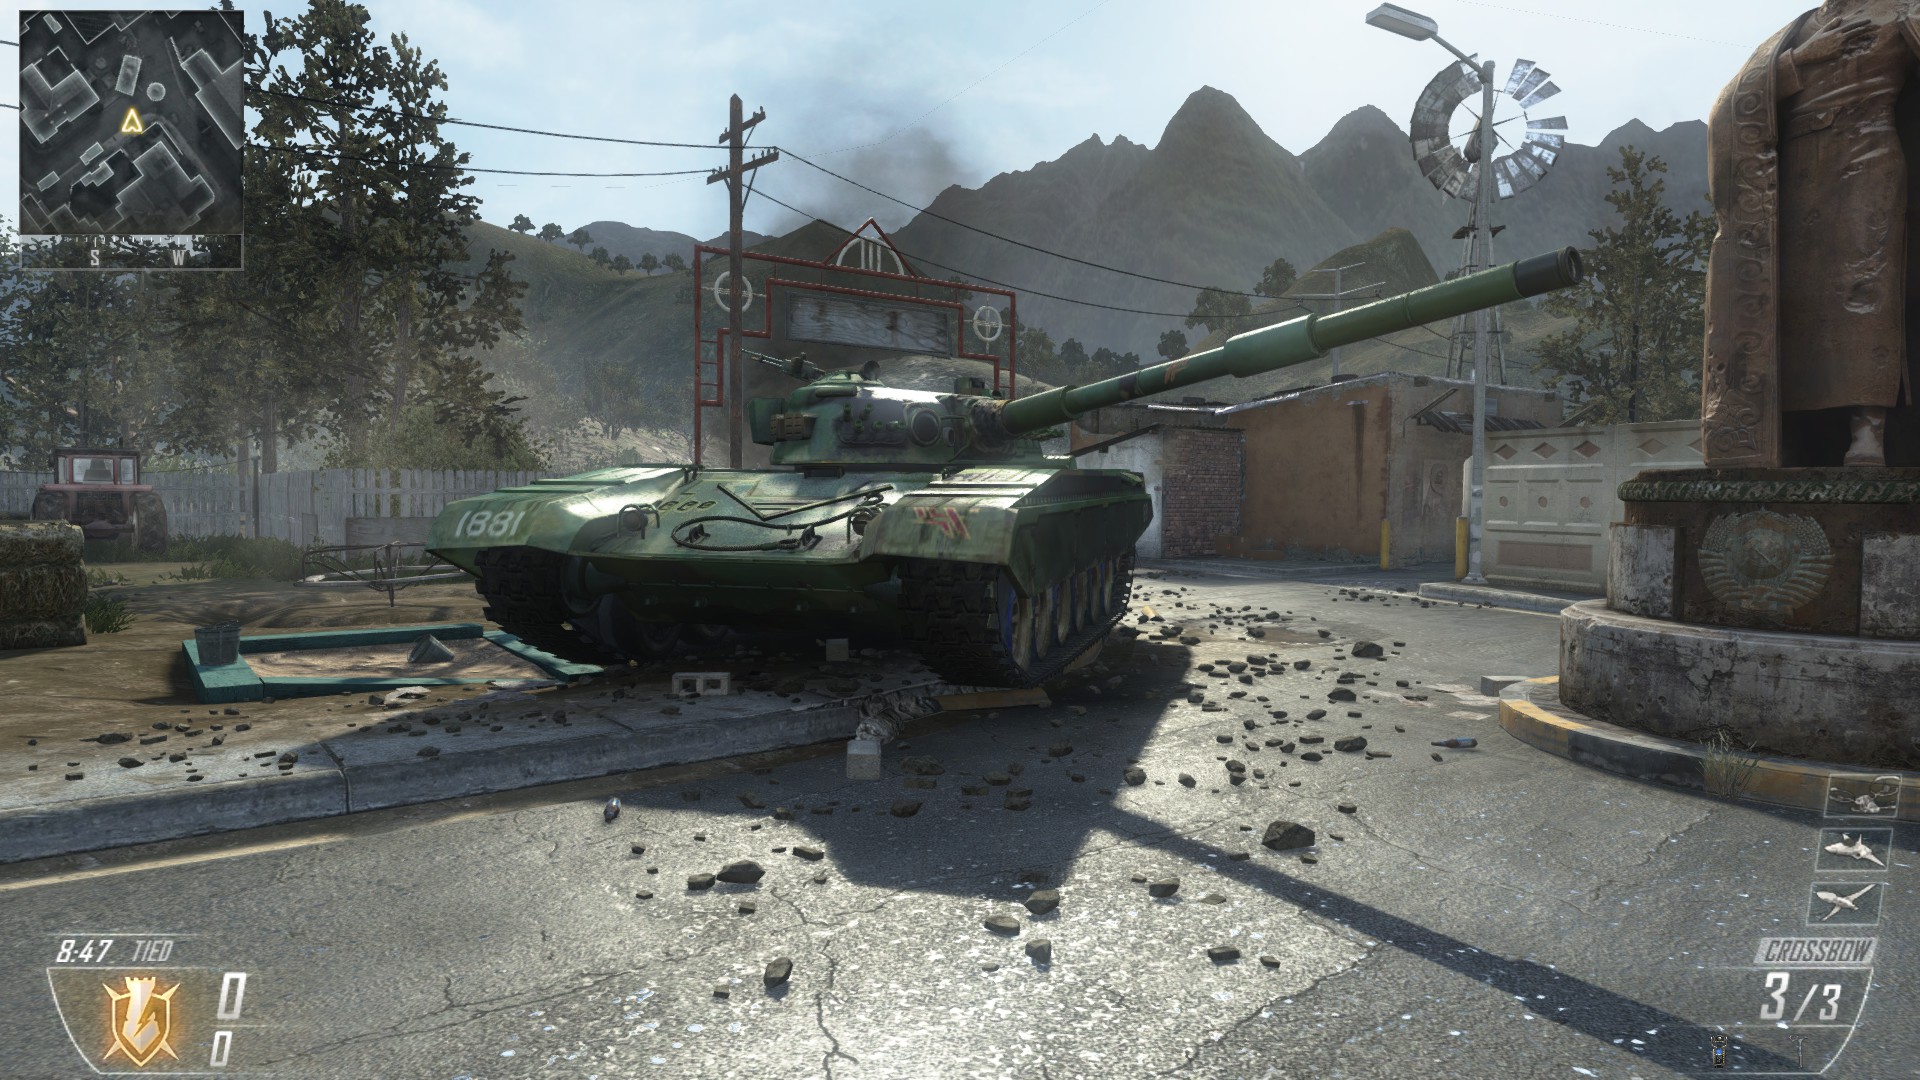 T-72, Call of Duty Wiki